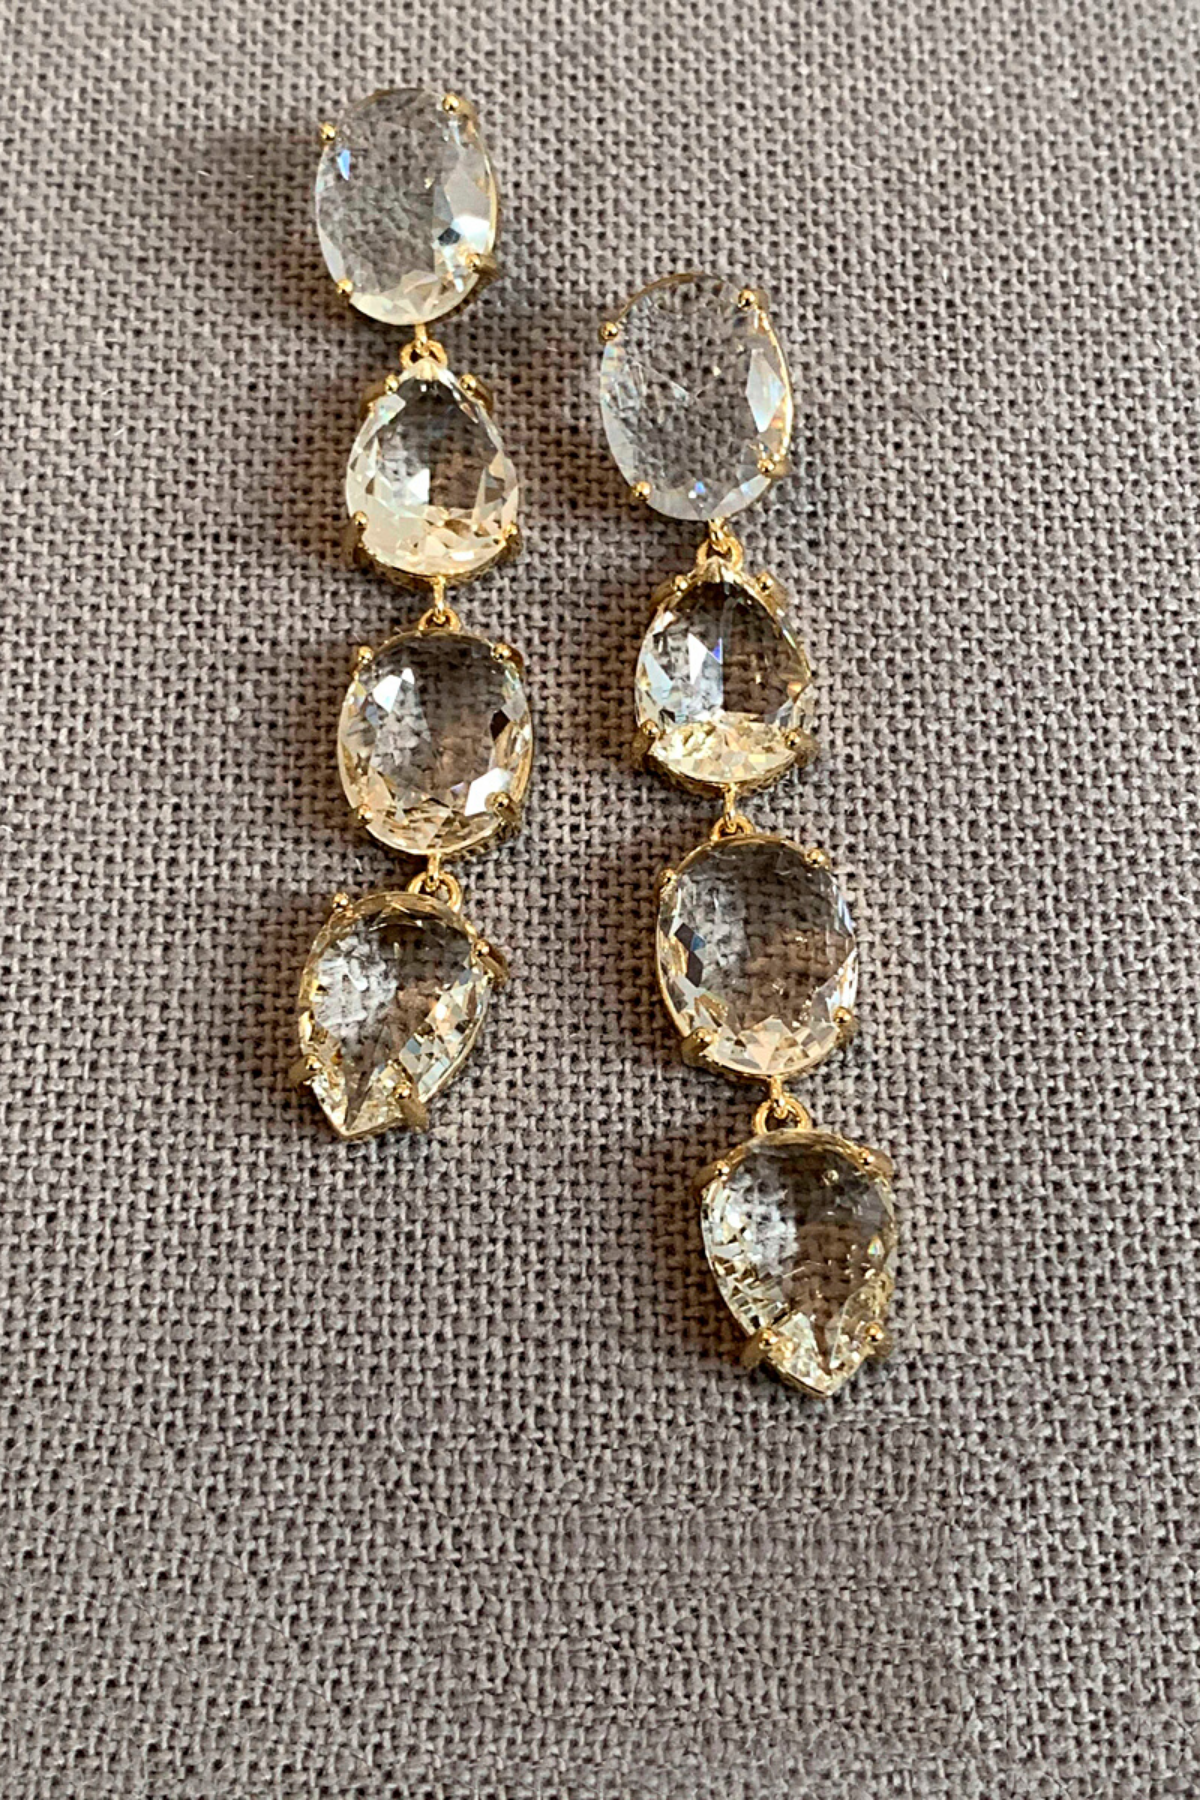 Venus statement 4 tier drop earrings - Park Lane Styling & Consulting